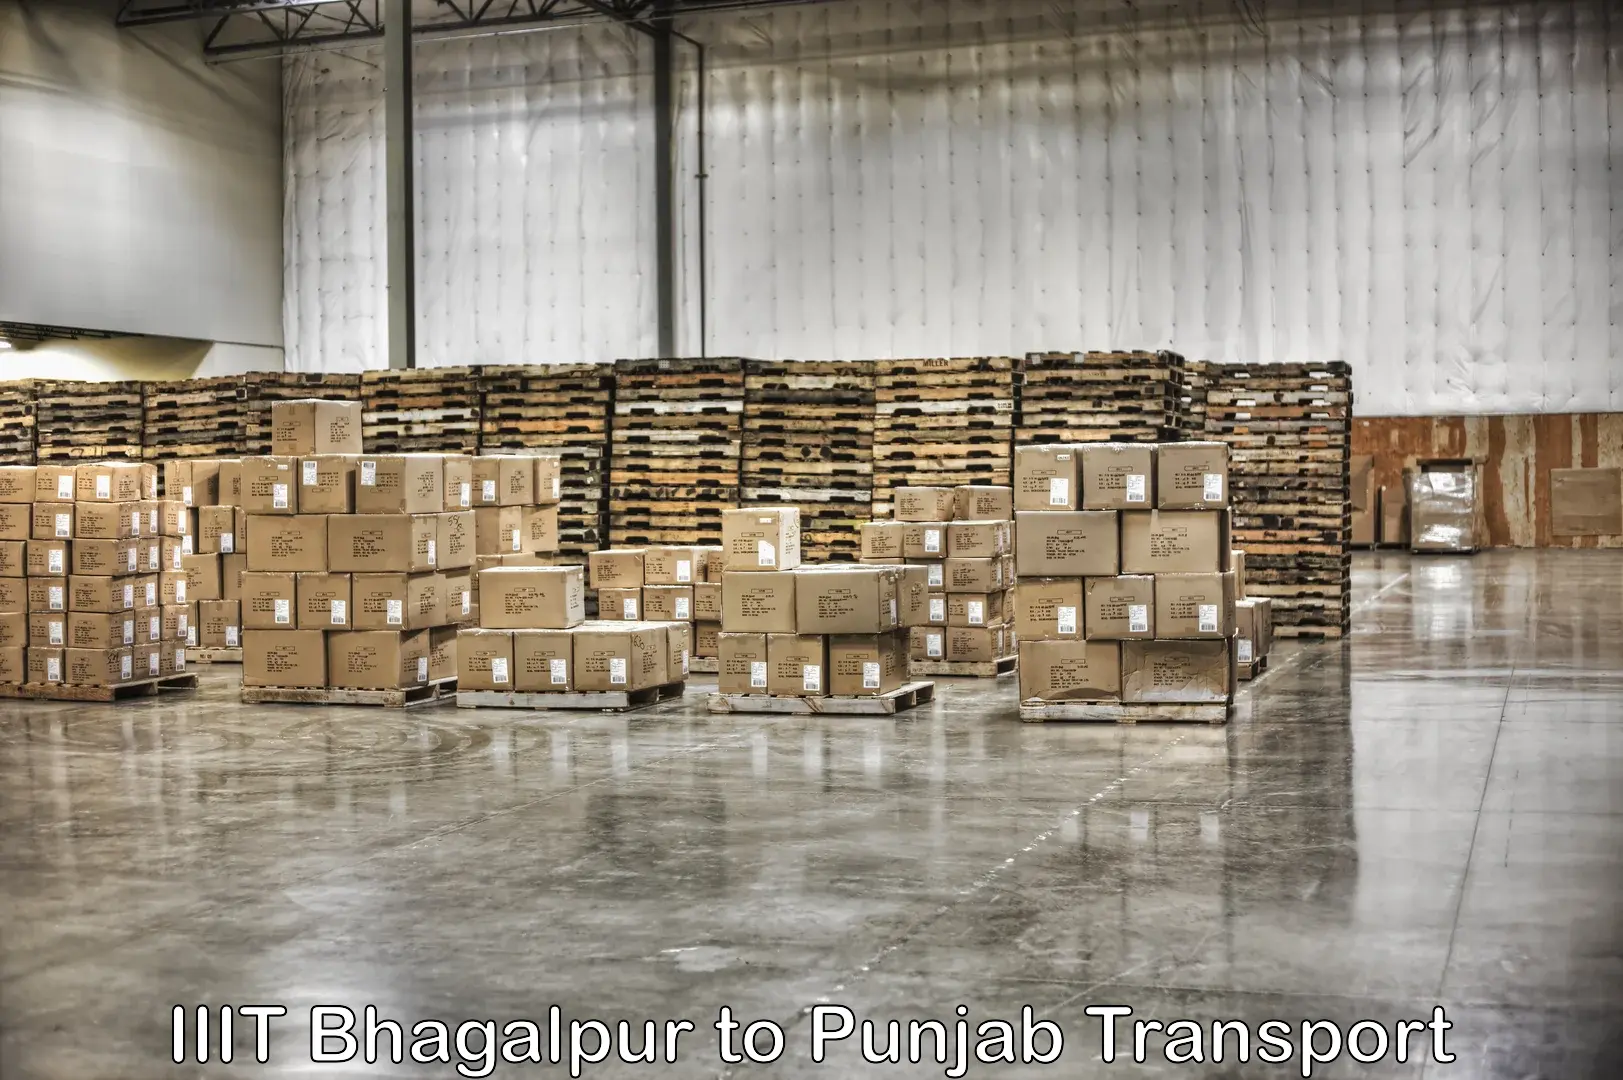 Daily parcel service transport IIIT Bhagalpur to Mohali